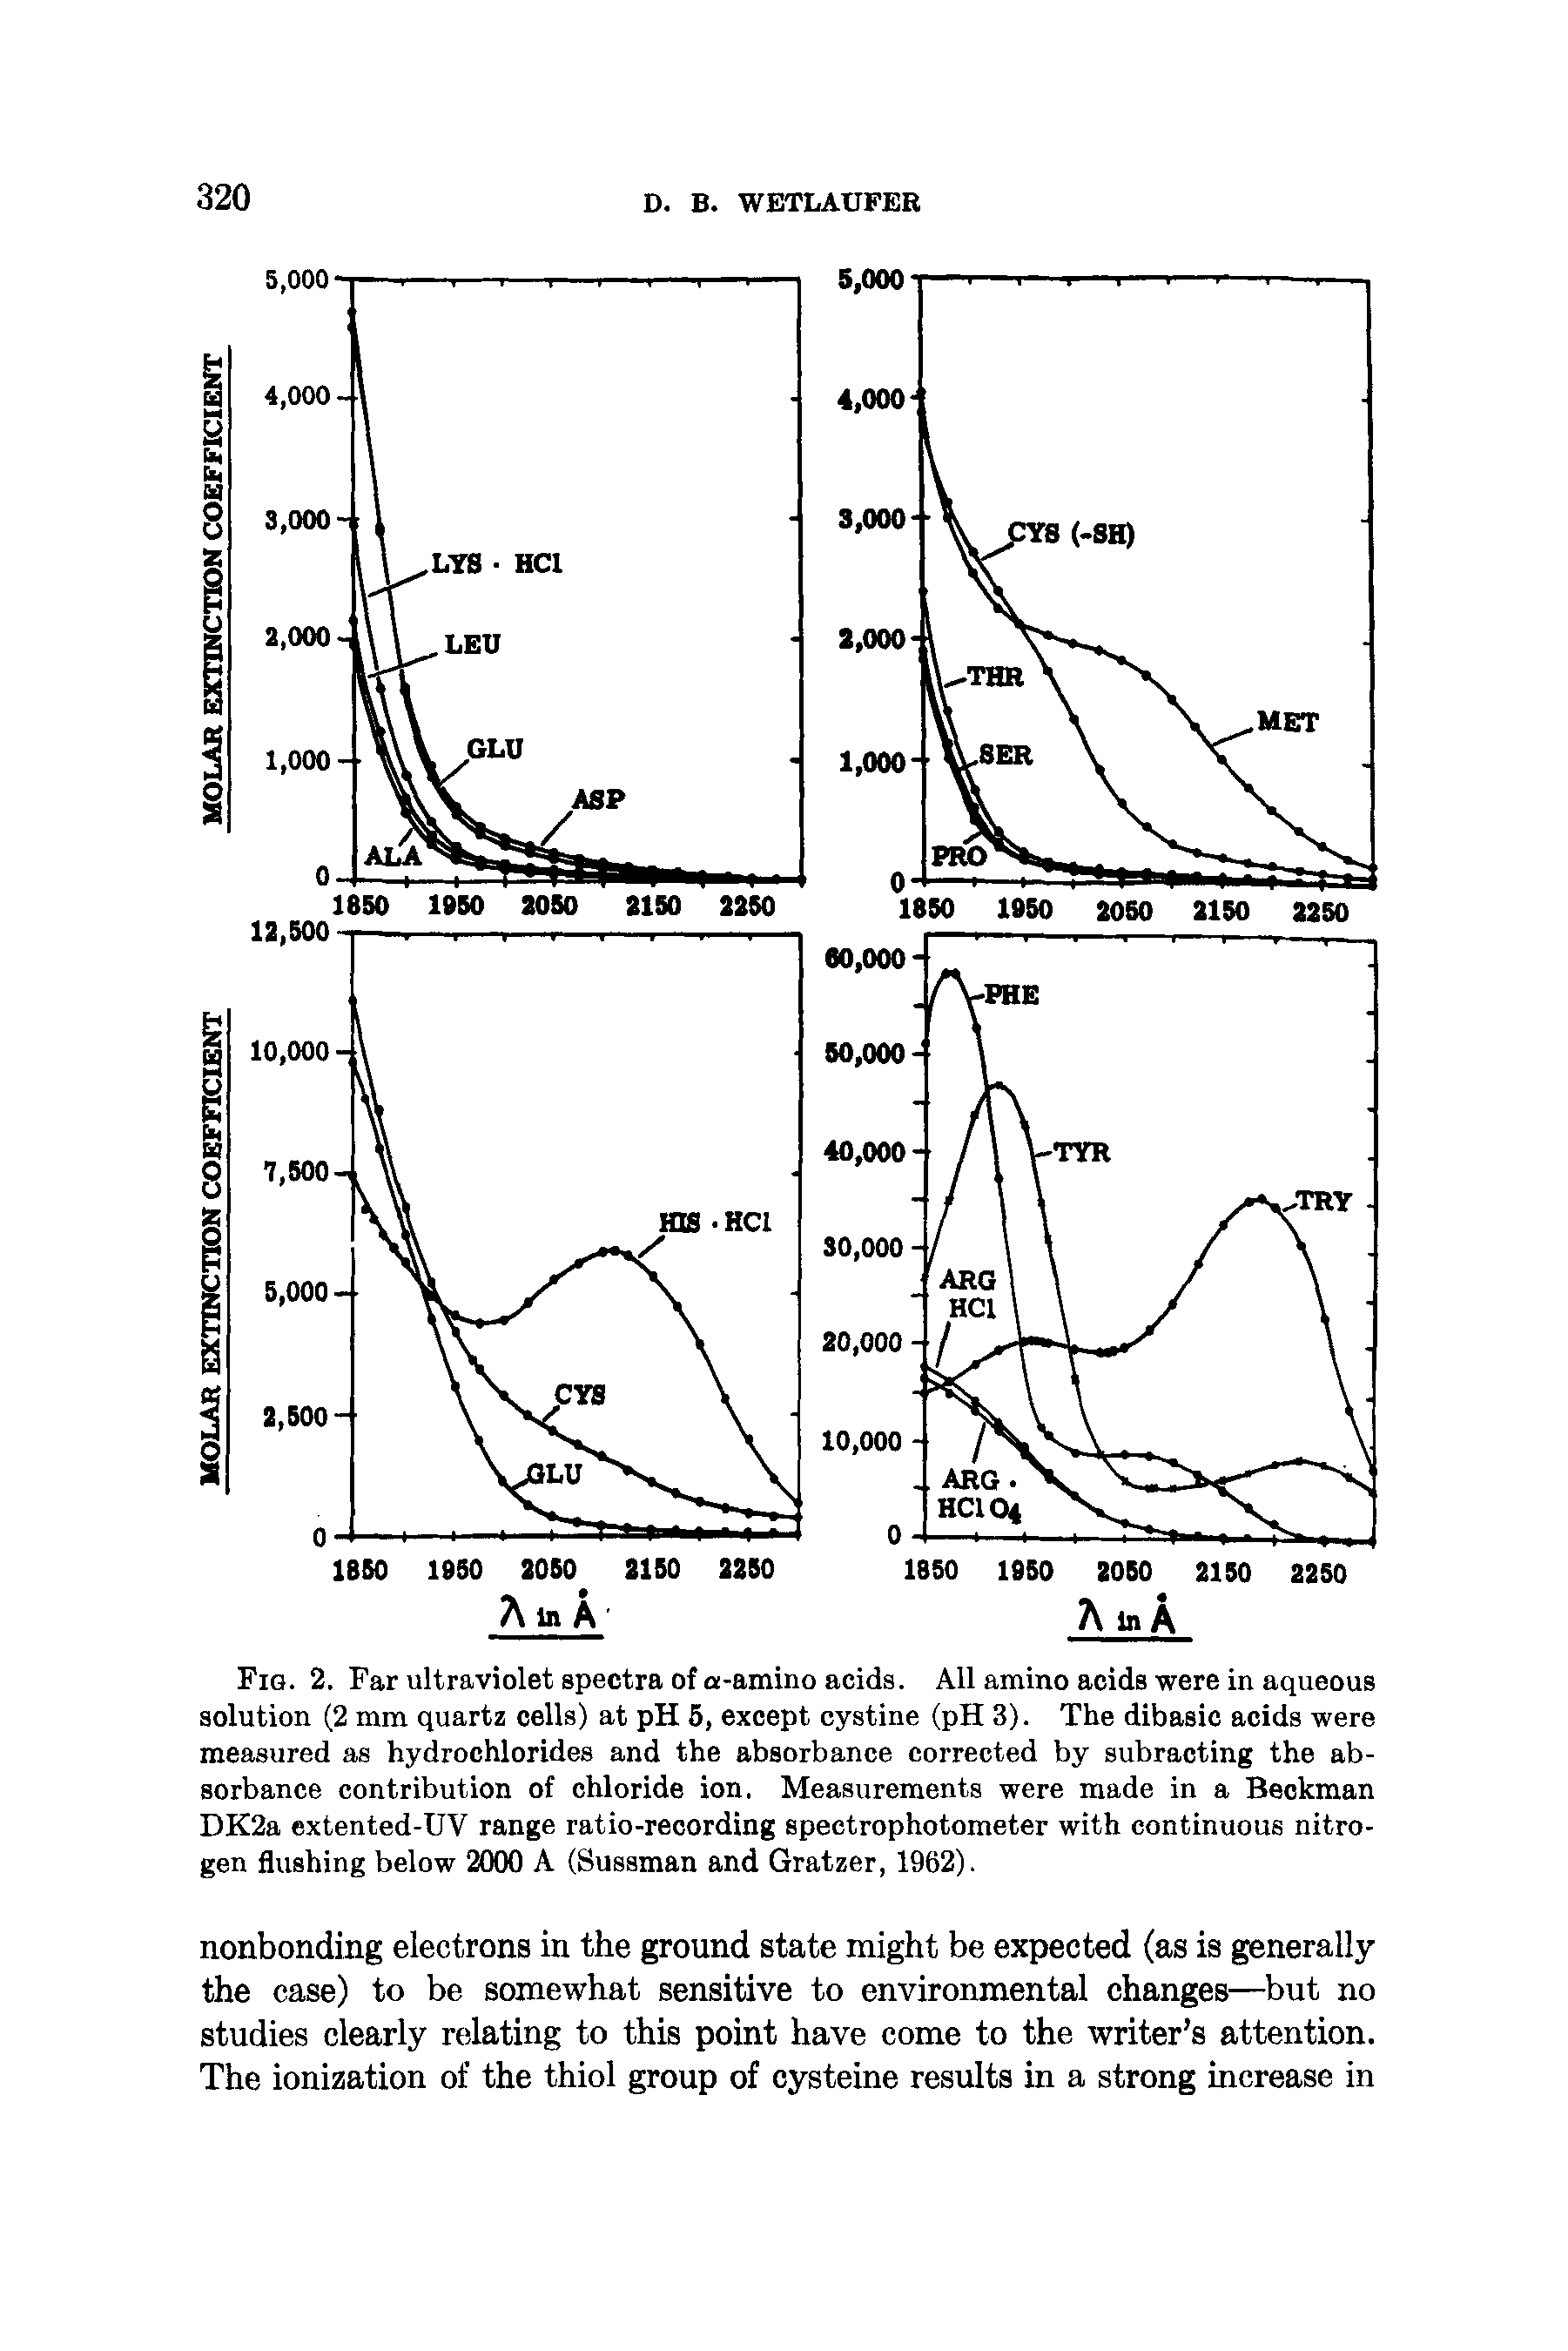 Fig. 2. Far ultraviolet spectra of a-amino acids. All amino acids were in aqueous solution (2 mm quartz cells) at pH 6, except cystine (pH 3). The dibasic acids were measured as hydrochlorides and the absorbance corrected by subracting the absorbance contribution of chloride ion. Measurements were made in a Beckman DK2a extented-UV range ratio-recording spectrophotometer with continuous nitrogen flushing below 2(KK) A (Sussman and Gratzer, 1962).